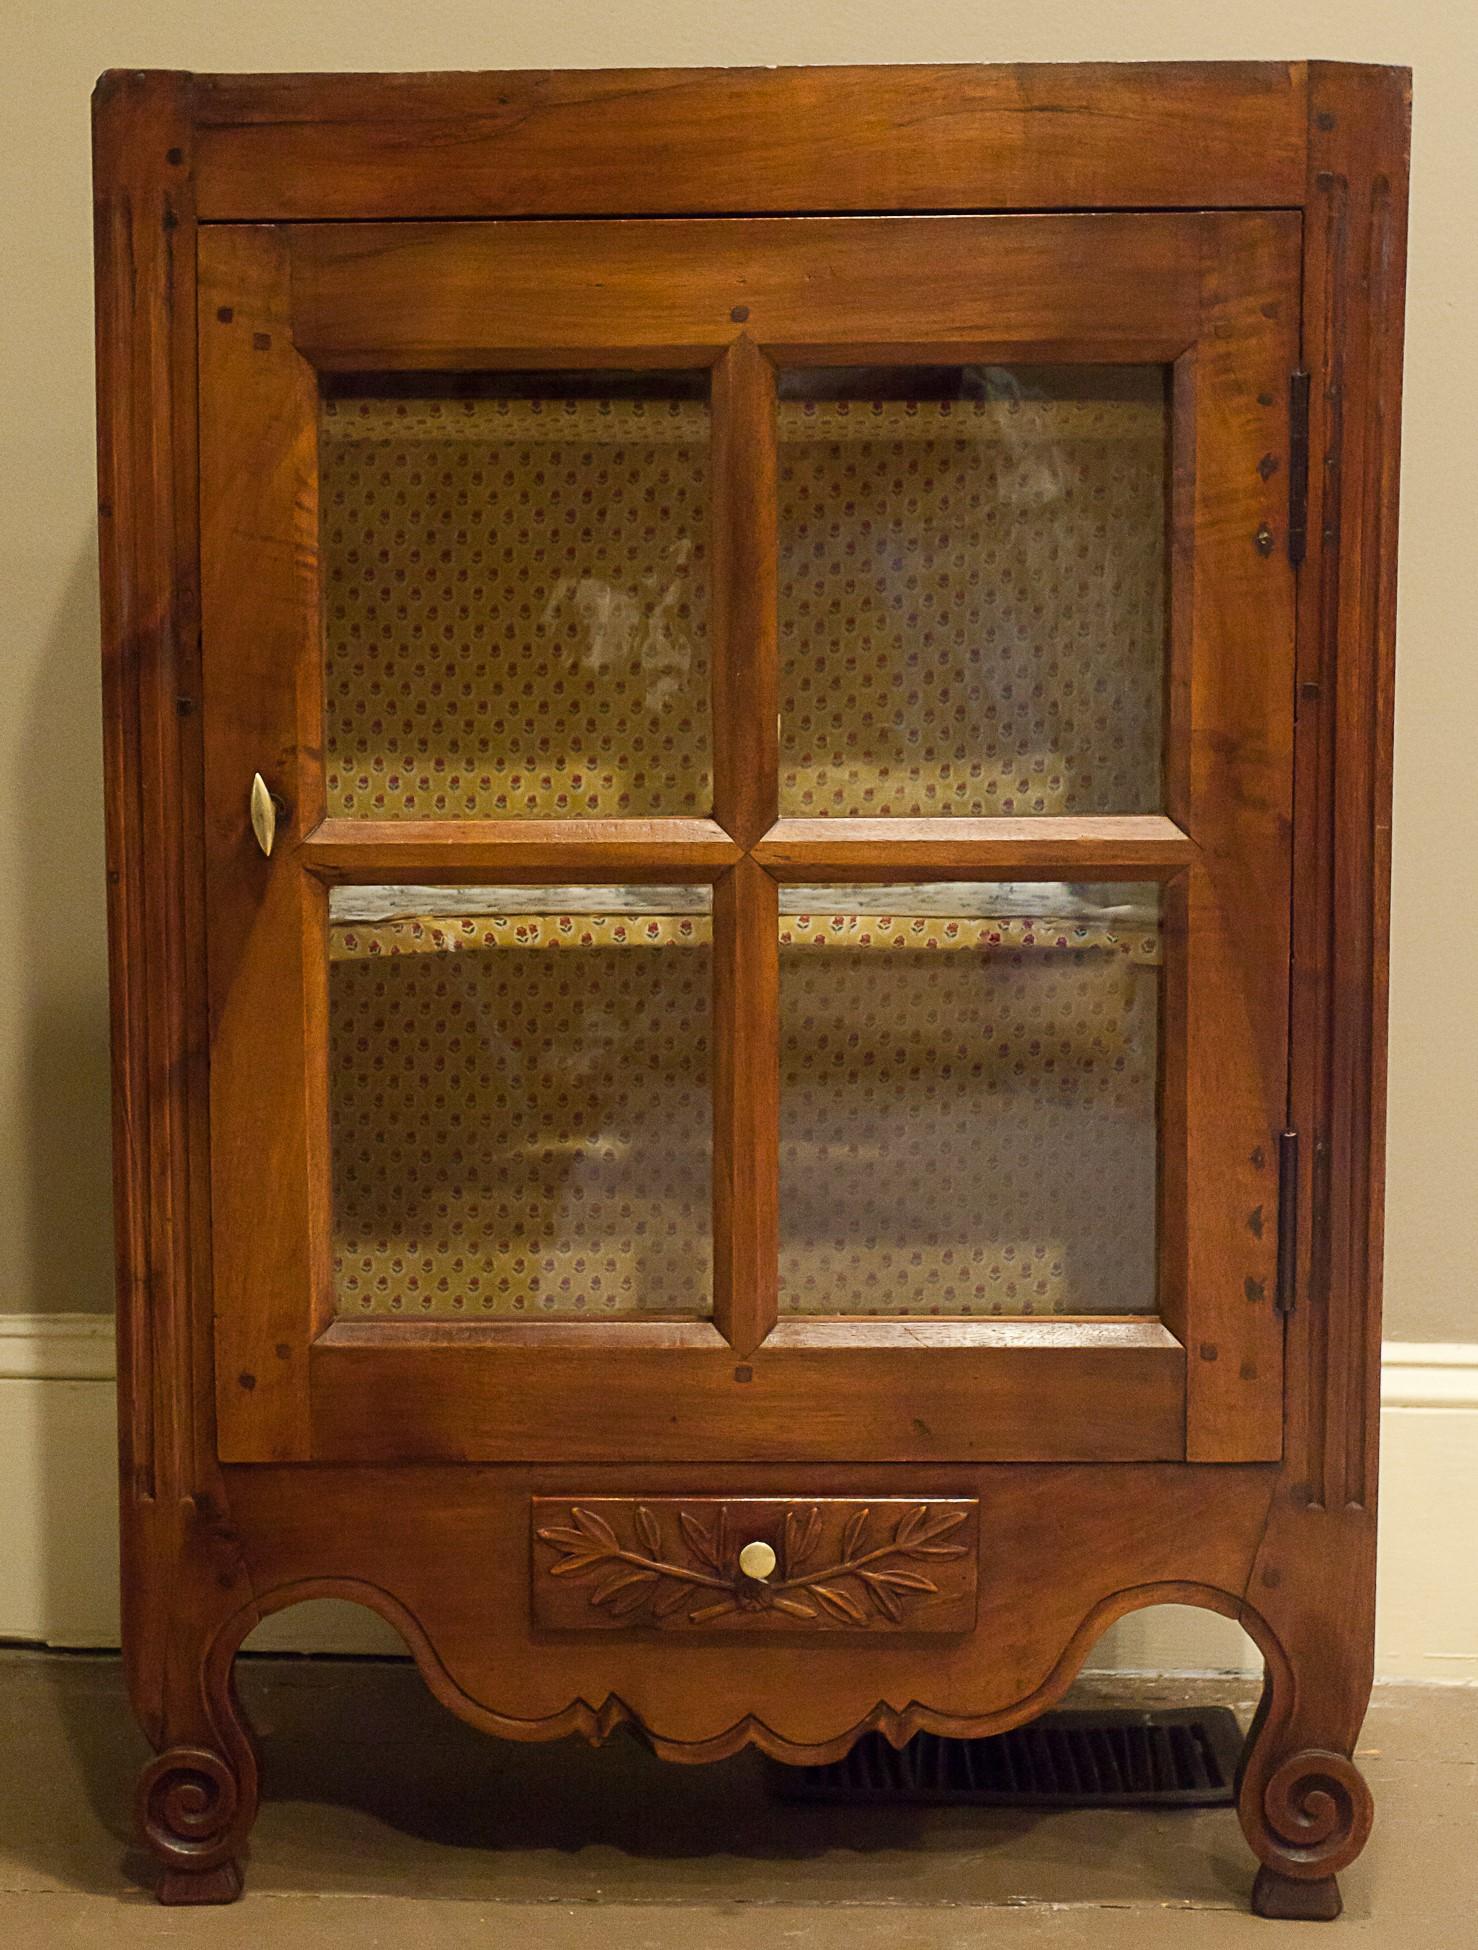 This small glass-door cabinet has short cabriole legs so it can be used as a standing piece, but it also has original cast iron hooks on its sides for use as a hanging cabinet possibly on shipboard. Made of fruitwood. Door has 4 old glass panes. One